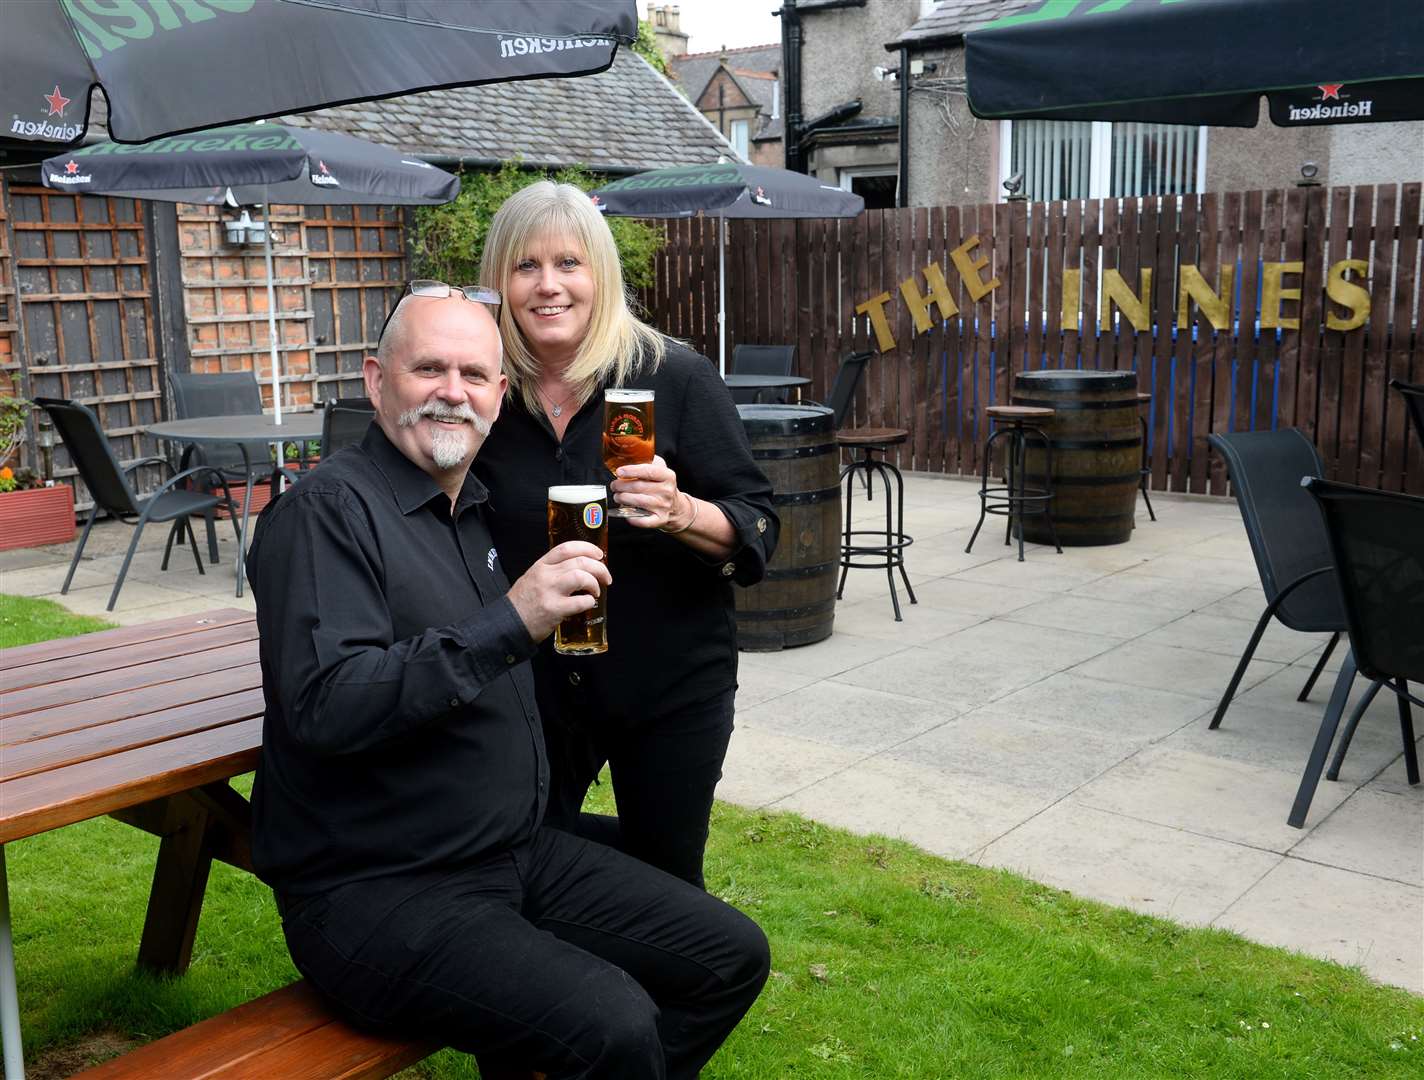 Craig and Collette MacLeod were ready for costumers in the beer garden of The Innes. Picture: Gary Anthony